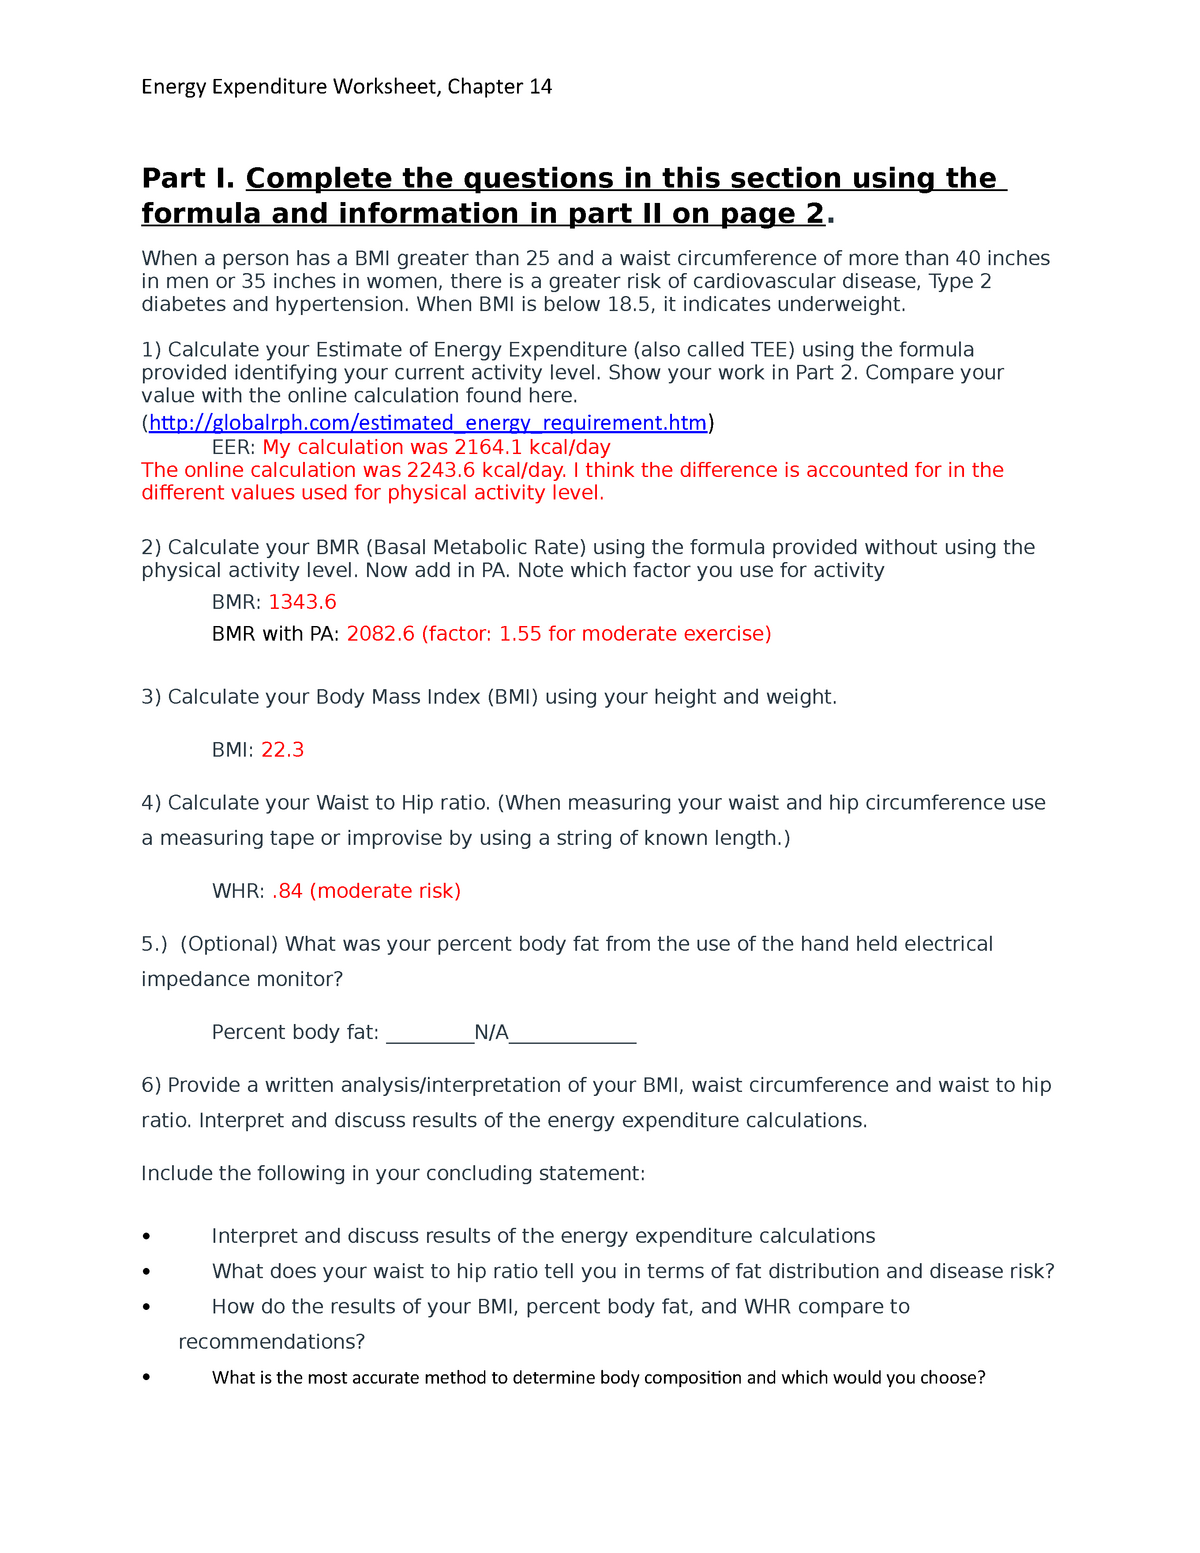 Energy Expenditure Worksheet Copy Part I Complete The Questions In